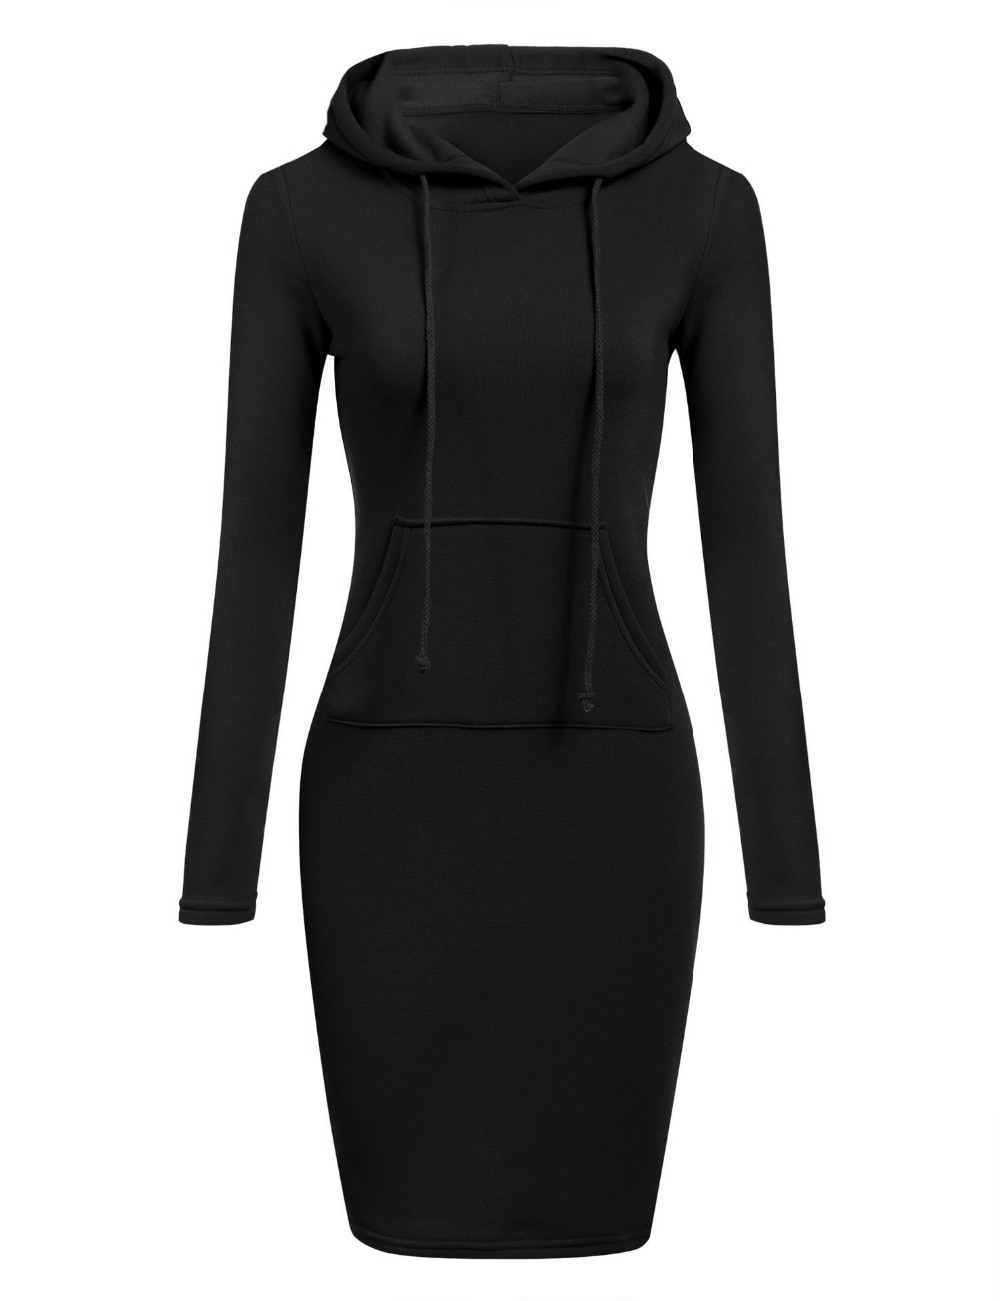 Women's Solid Color Hooded Knee-Length Dress